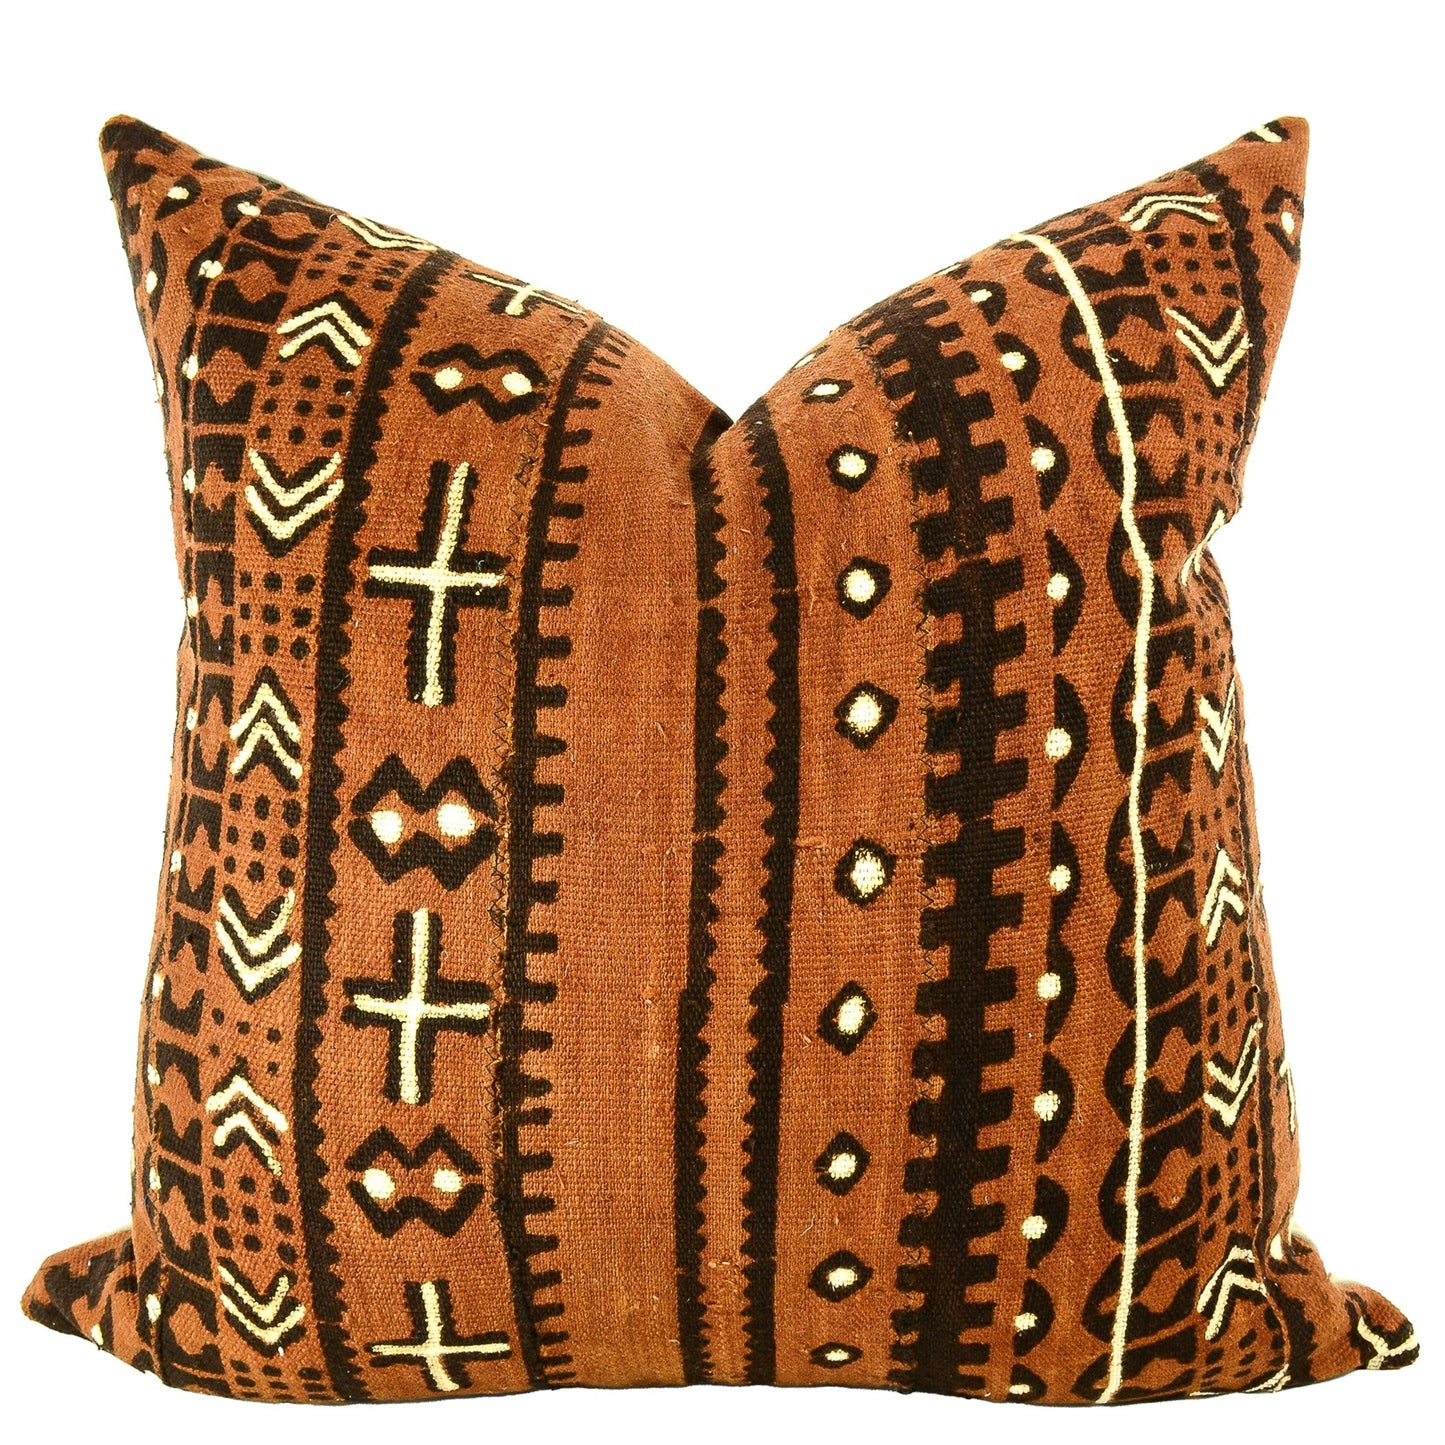 Front of pillow with rich brown, black and white patterns made from a traditional handwoven mudcloth textile sheet from Mali West Africa